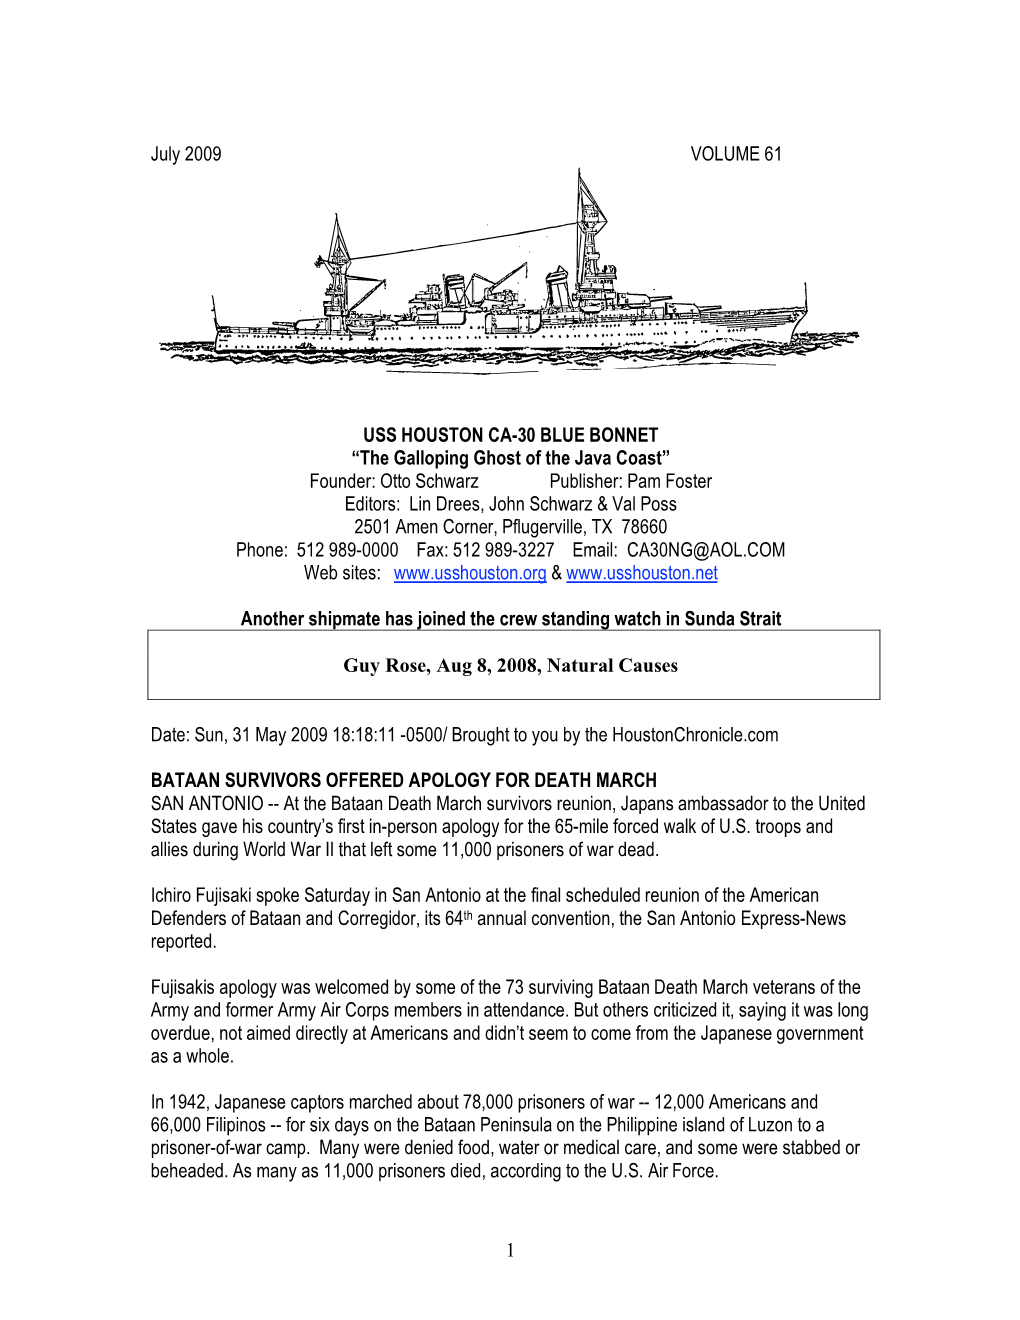 1 July 2009 VOLUME 61 USS HOUSTON CA-30 BLUE BONNET “The Galloping Ghost of the Java Coast” Founder: Otto Schwarz Publishe